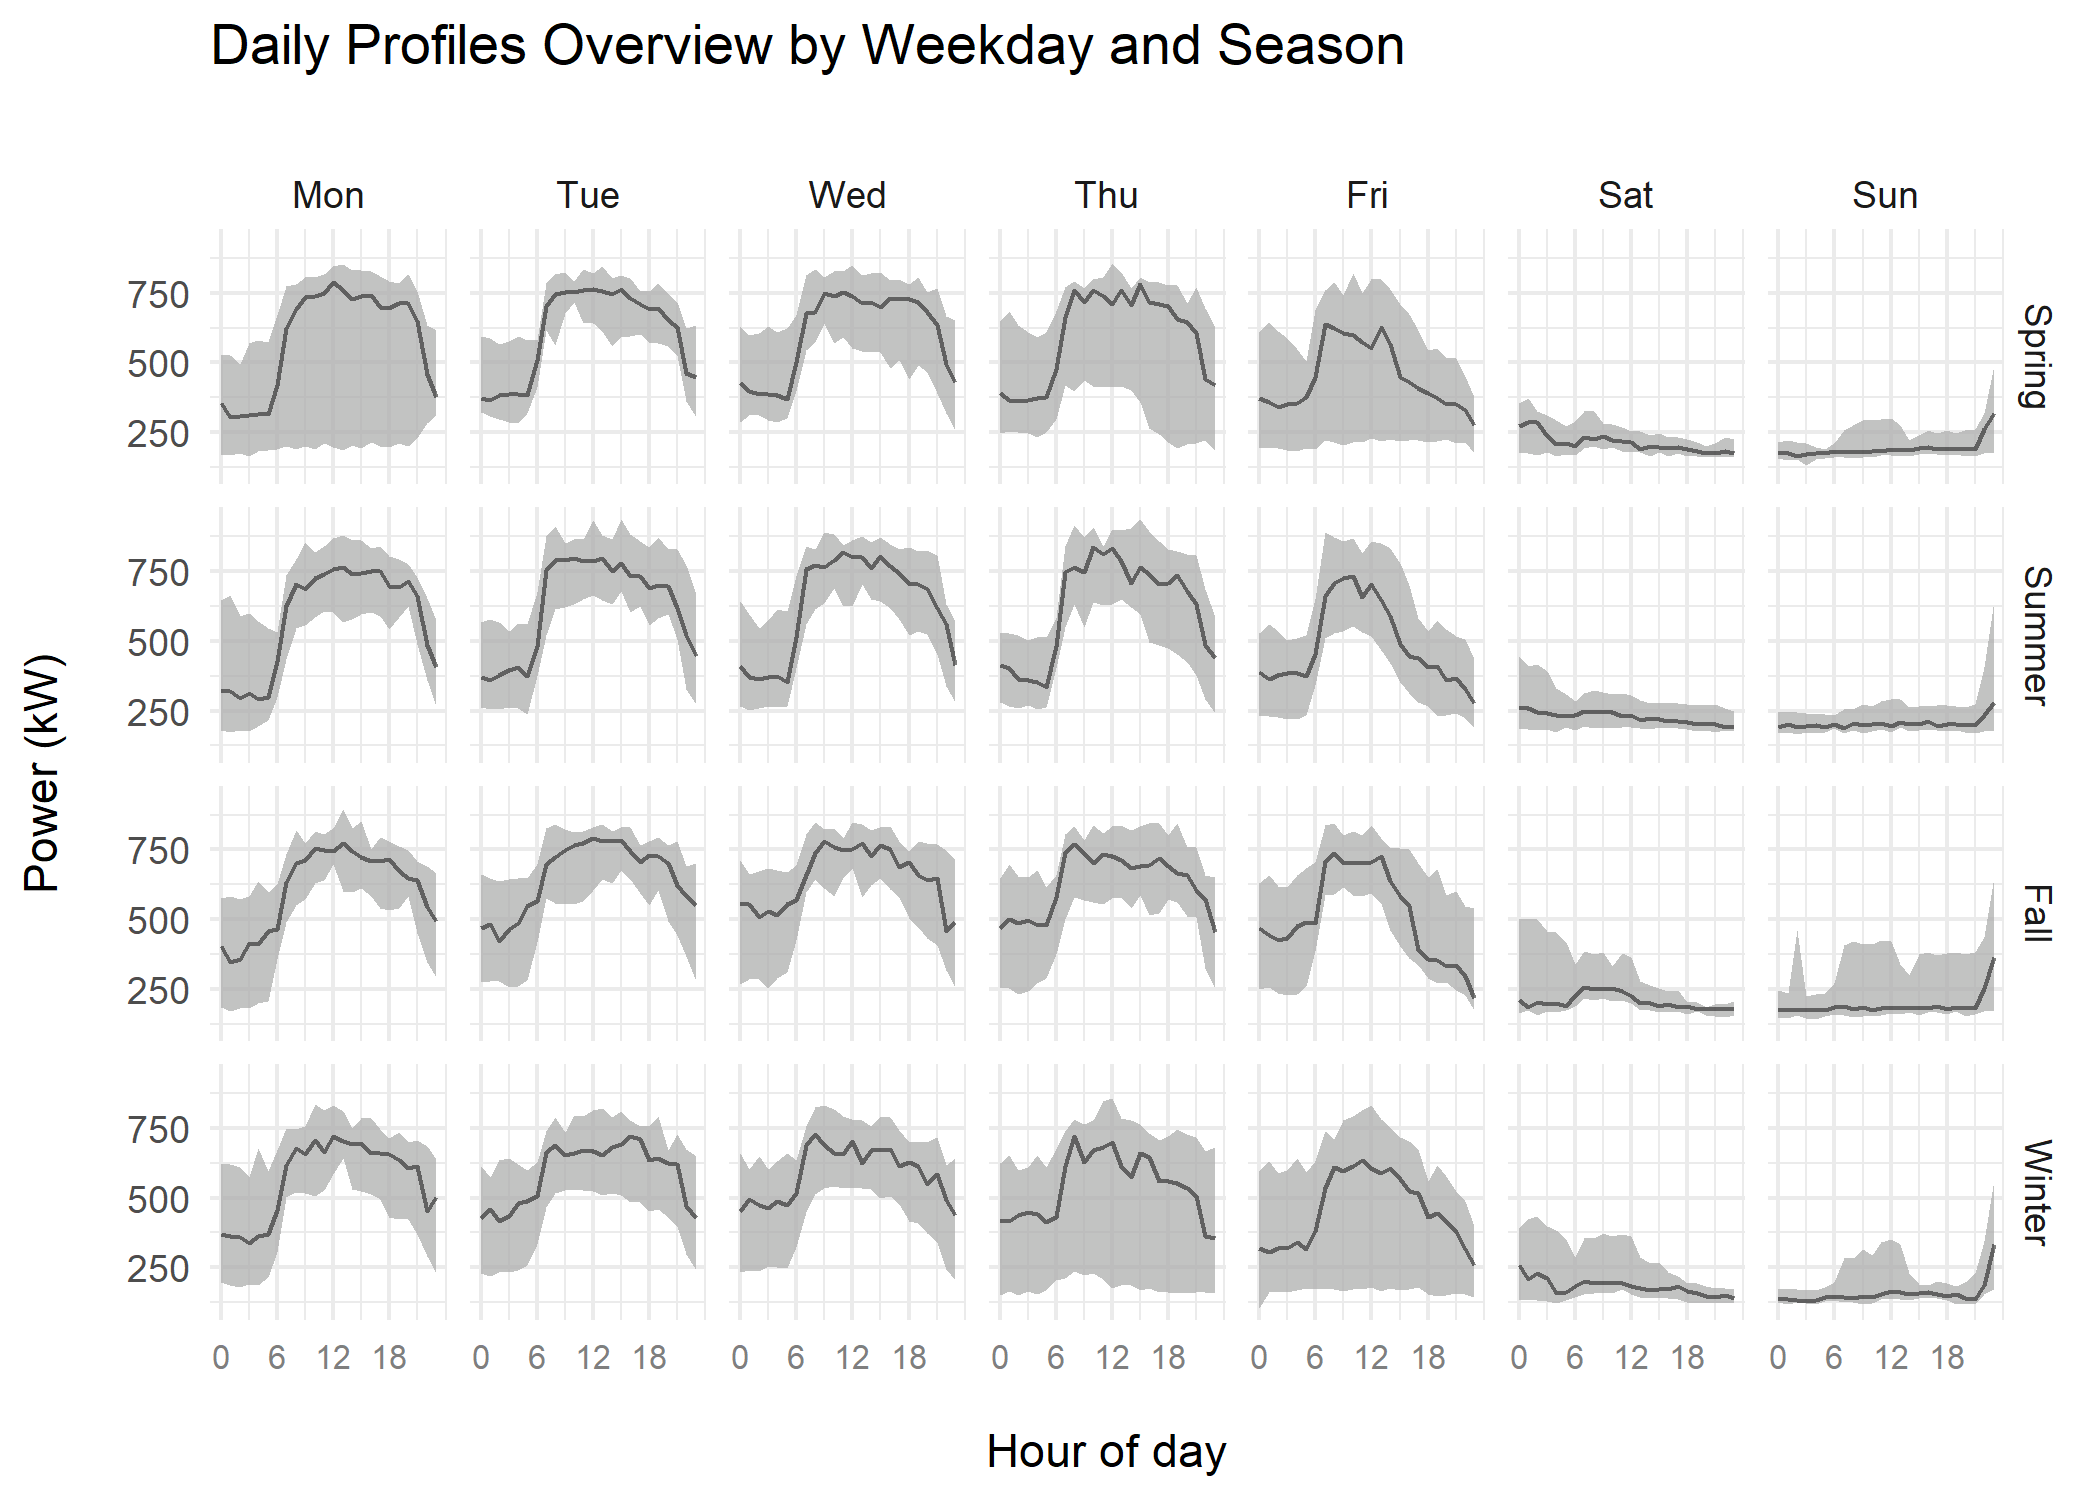 Overview of Daily Profiles by Weekday and Season